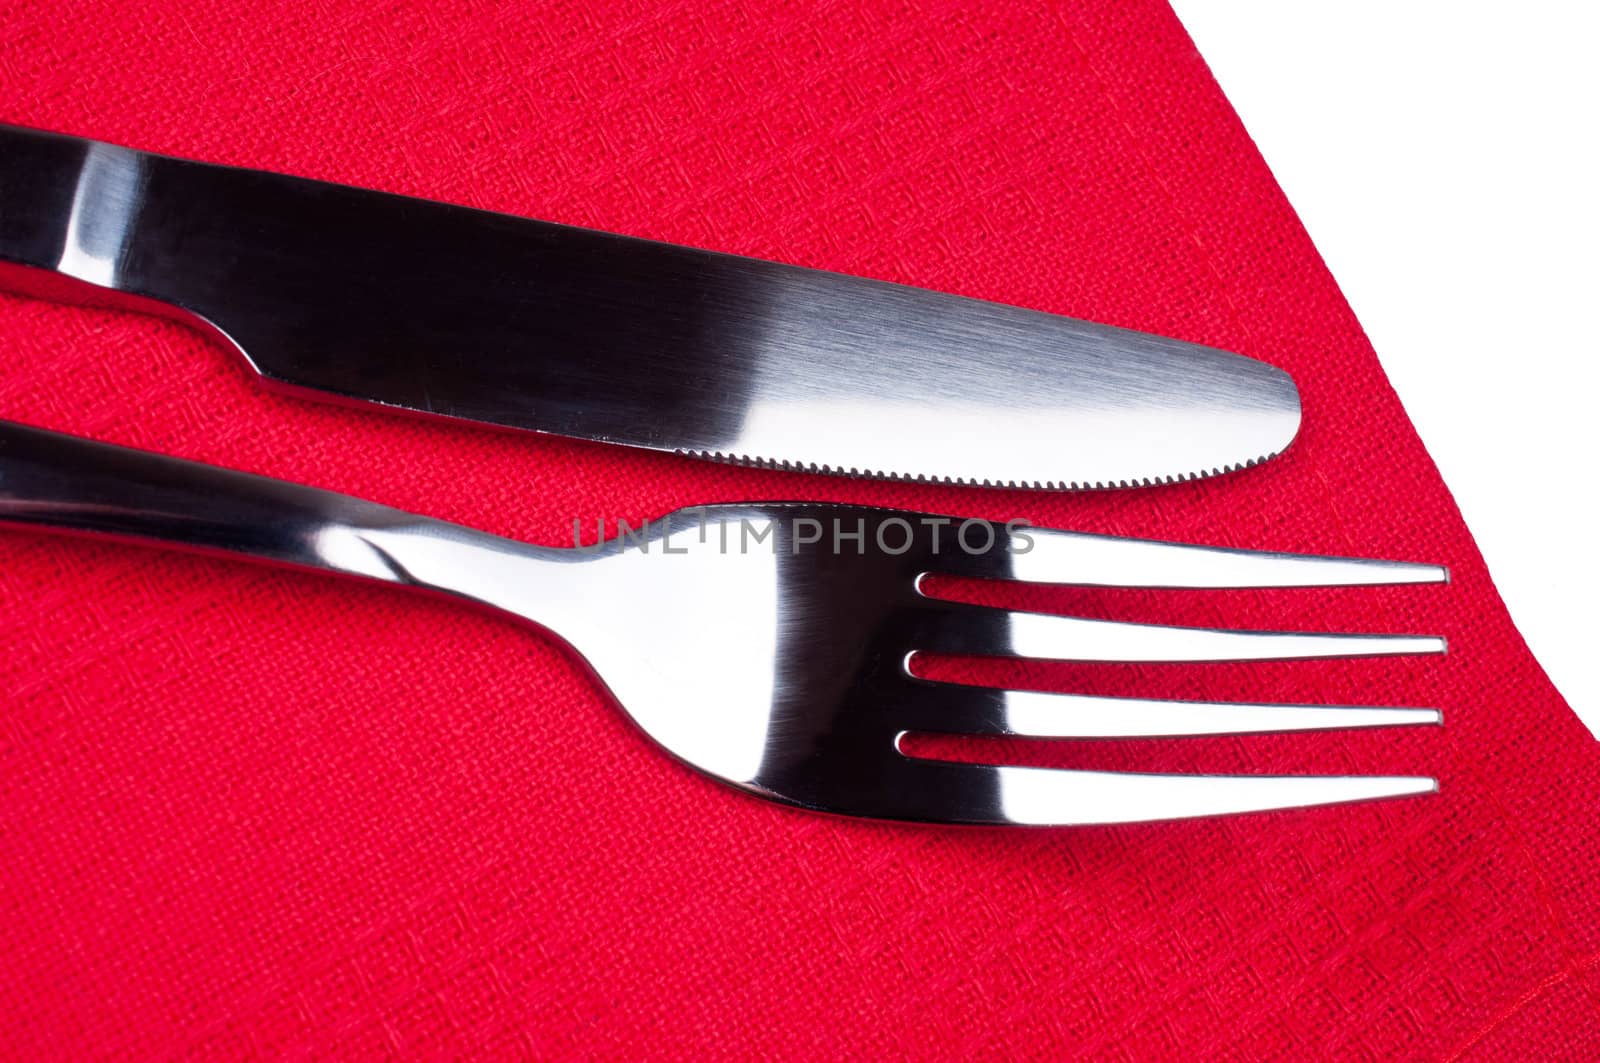 Knife and fork on red tablecloth close up